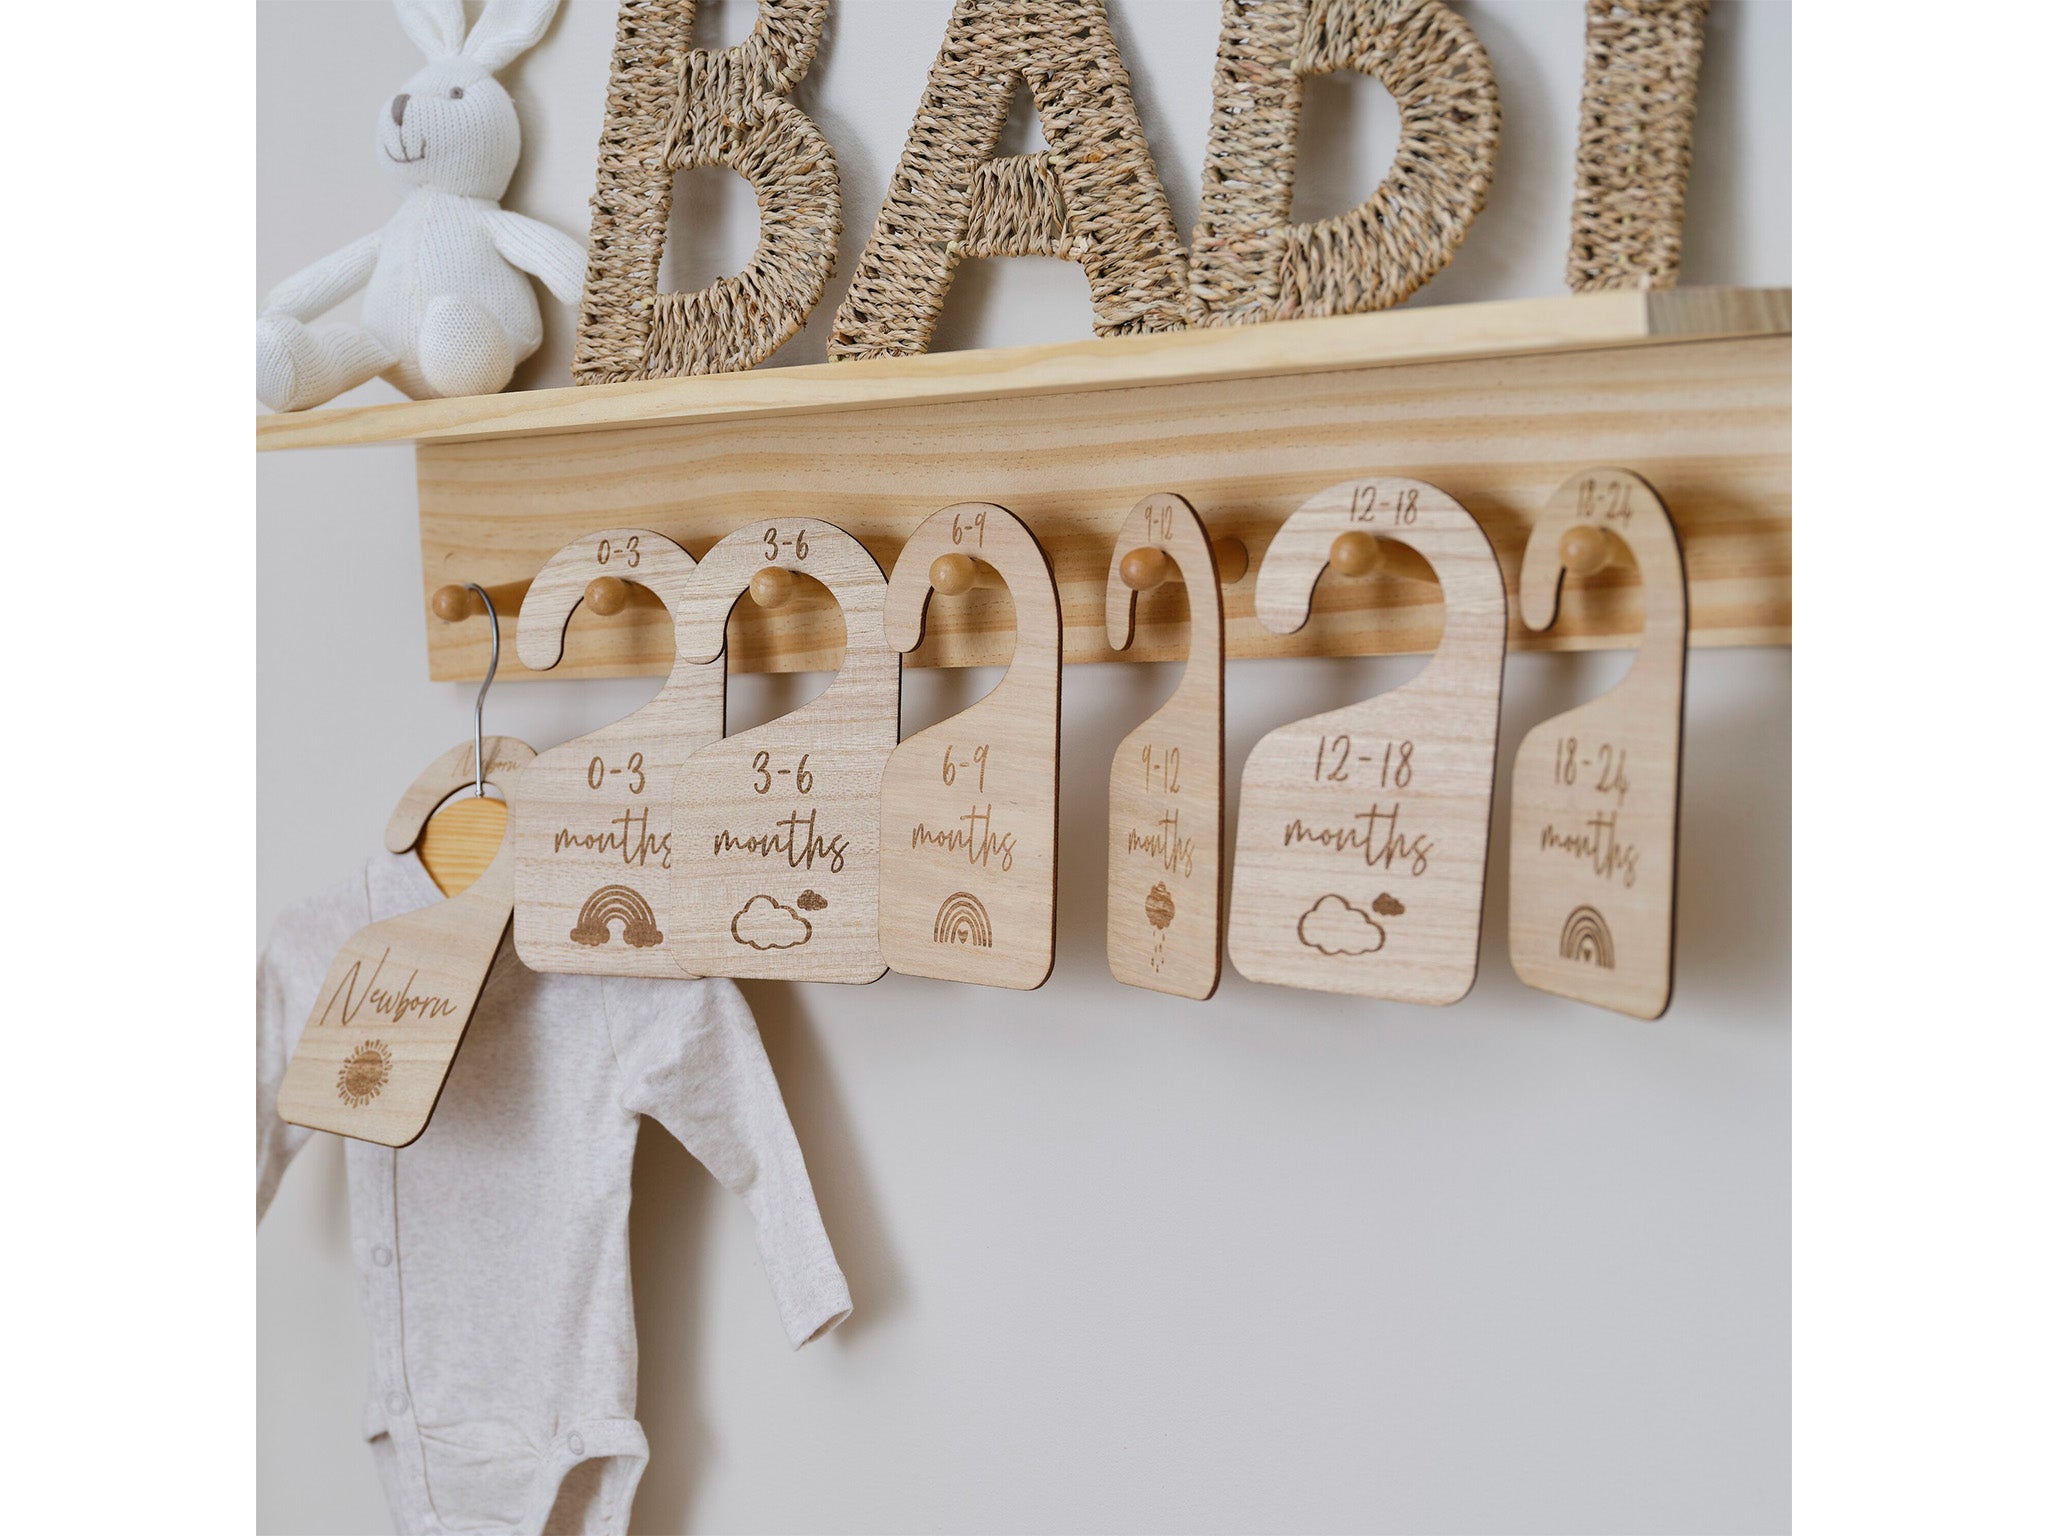 best baby shower gifts